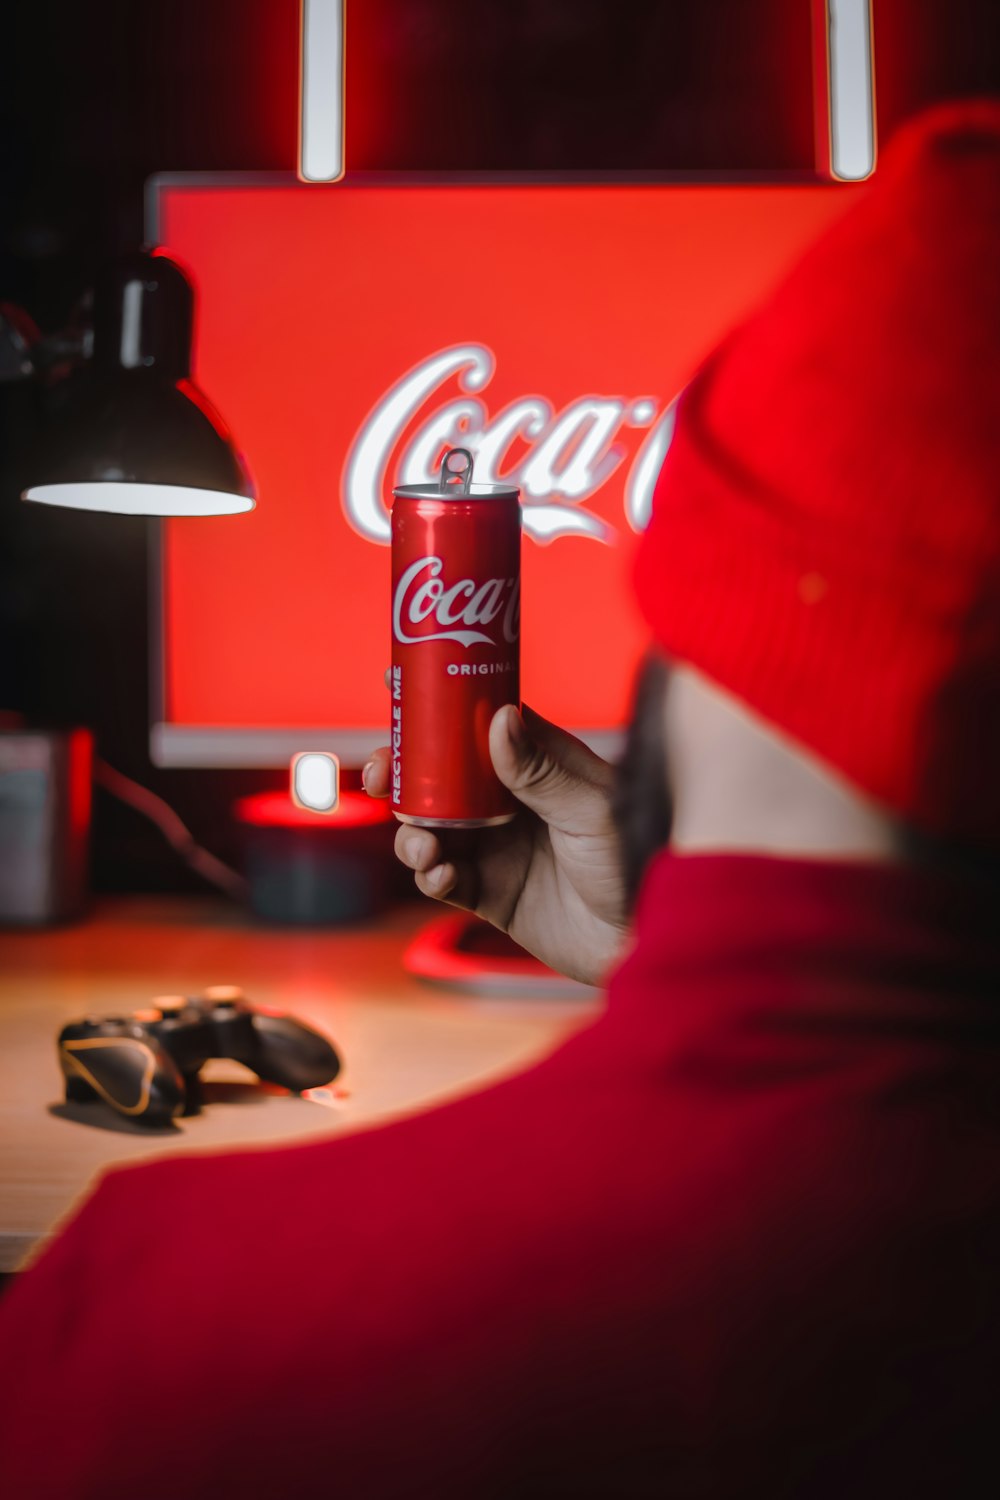 a man in a red hat is holding a can of coca - cola